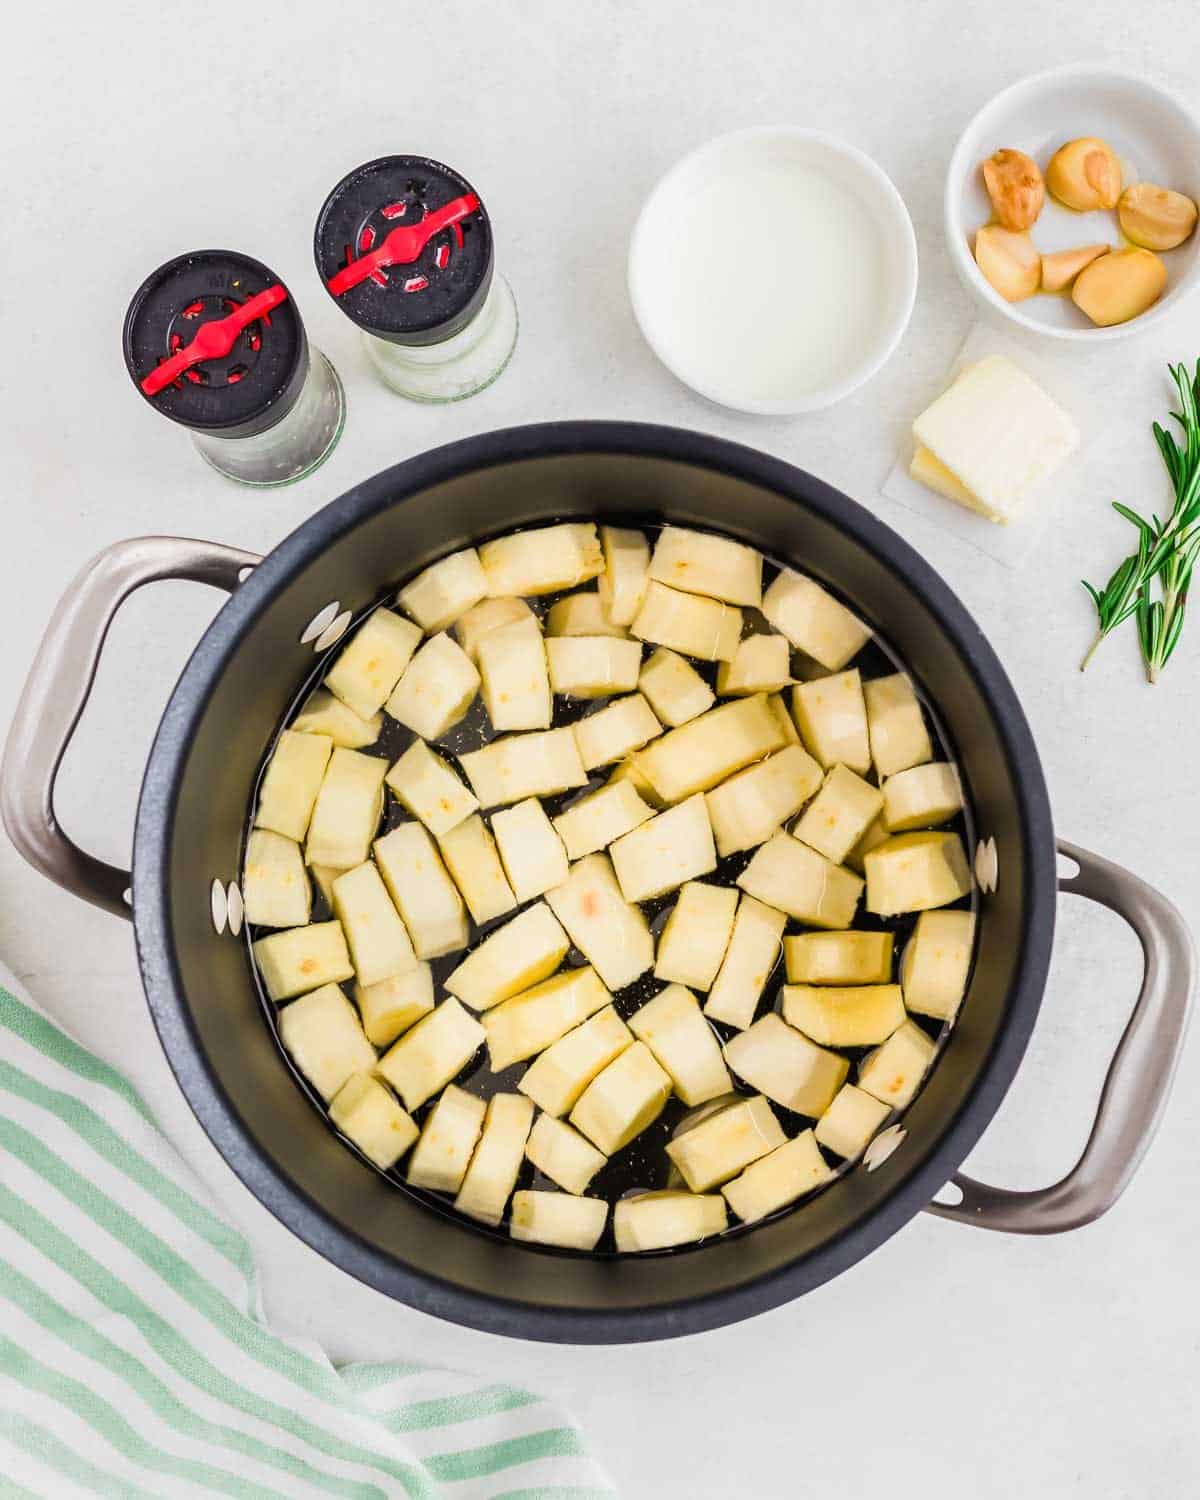 Chopped parsnips in a pot with ingredients like milk, butter, and rosemary on the side, prepared for cooking.